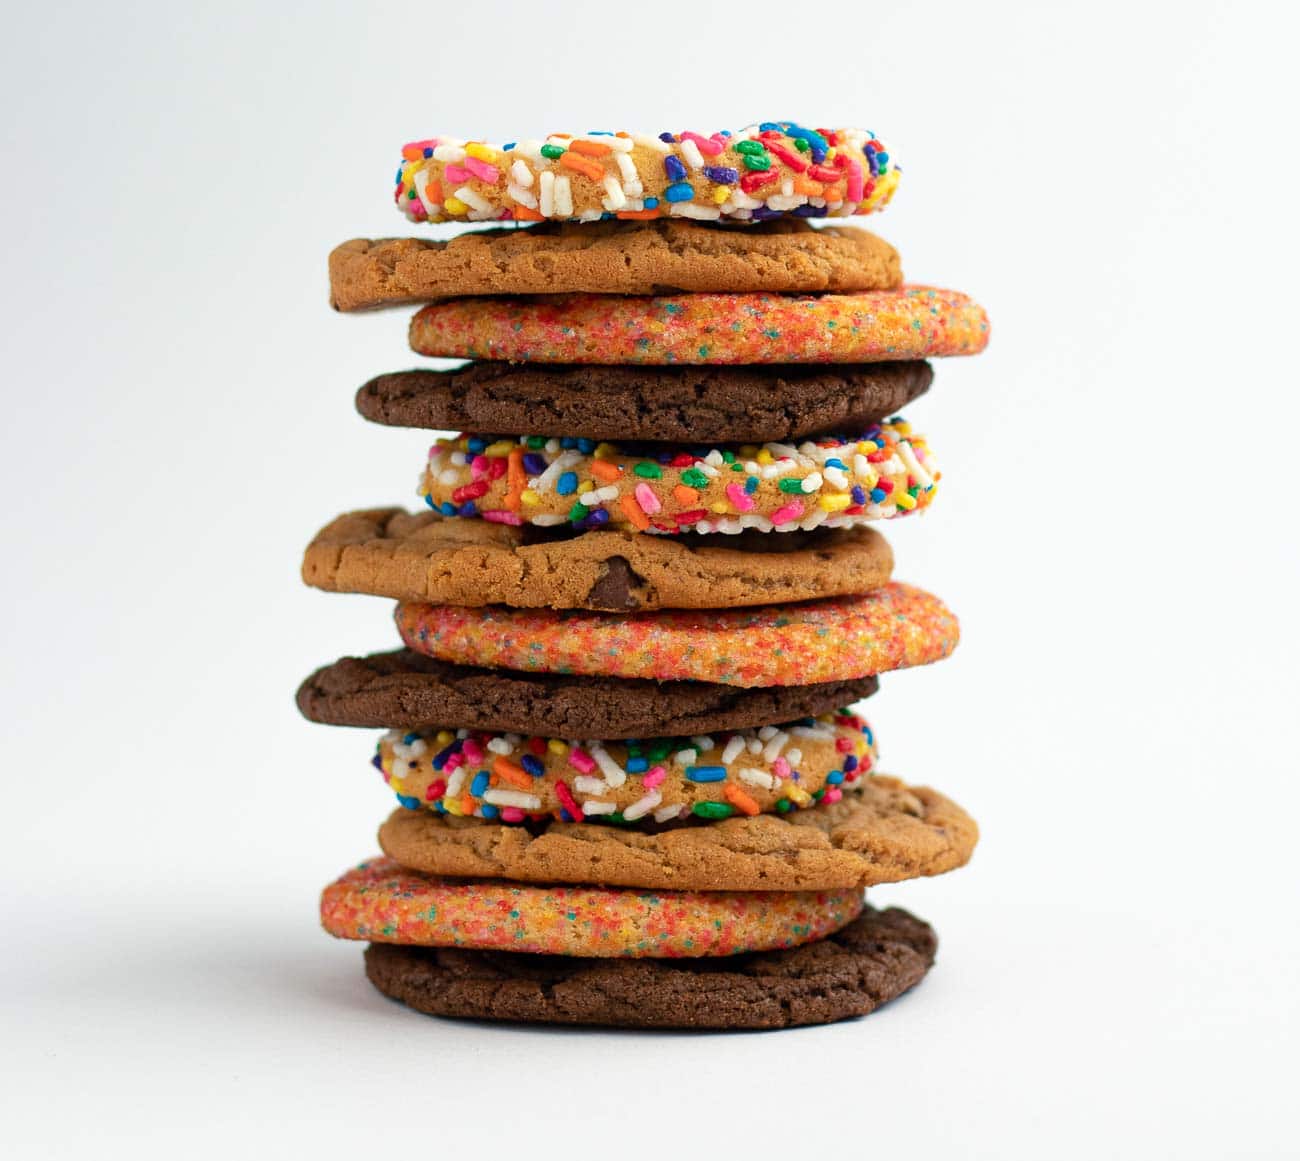 Picture of a dozen cookies including Birthday cake, Original chocolate chip, Sugar, Double fudge cookies alternately stacked